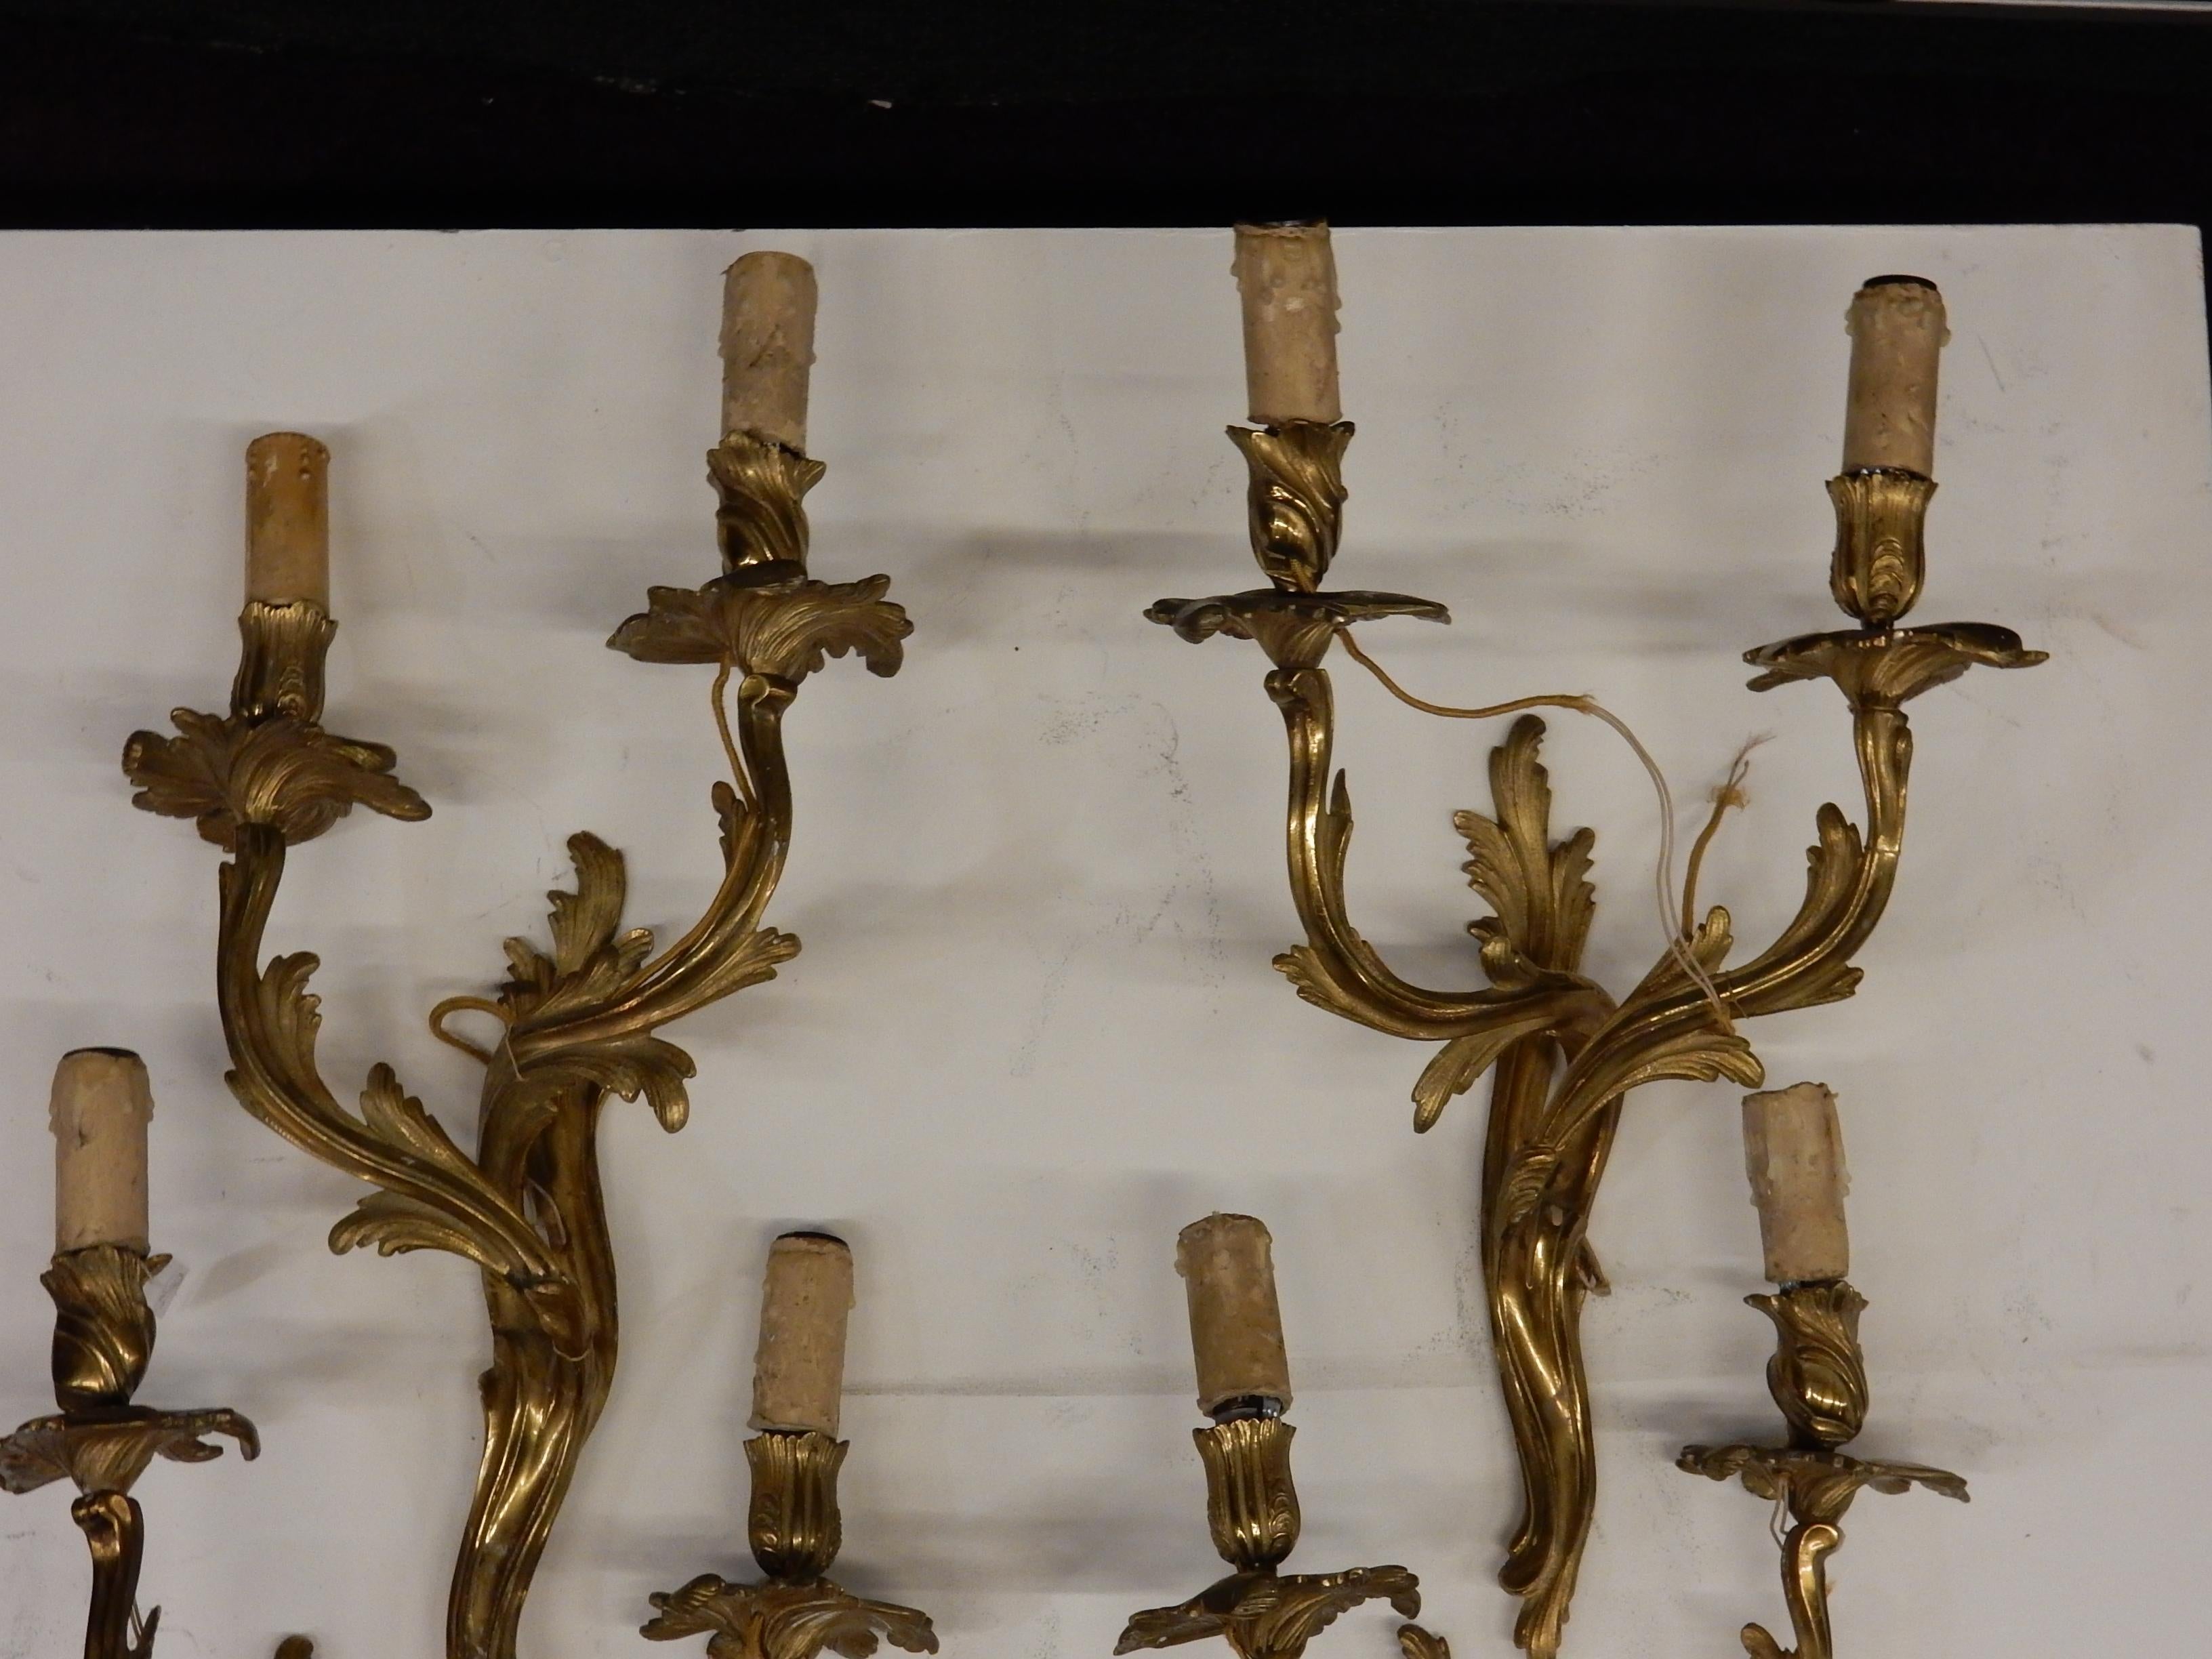 Series of 2 pairs of gilt bronze wall sconces, Louis 15 style, 2 screw bulbs per sconce, label sticker on the back Maison Baguès, 1970-1980. Measures: Height 49 cm, width 33 cm, depth 16 cm.